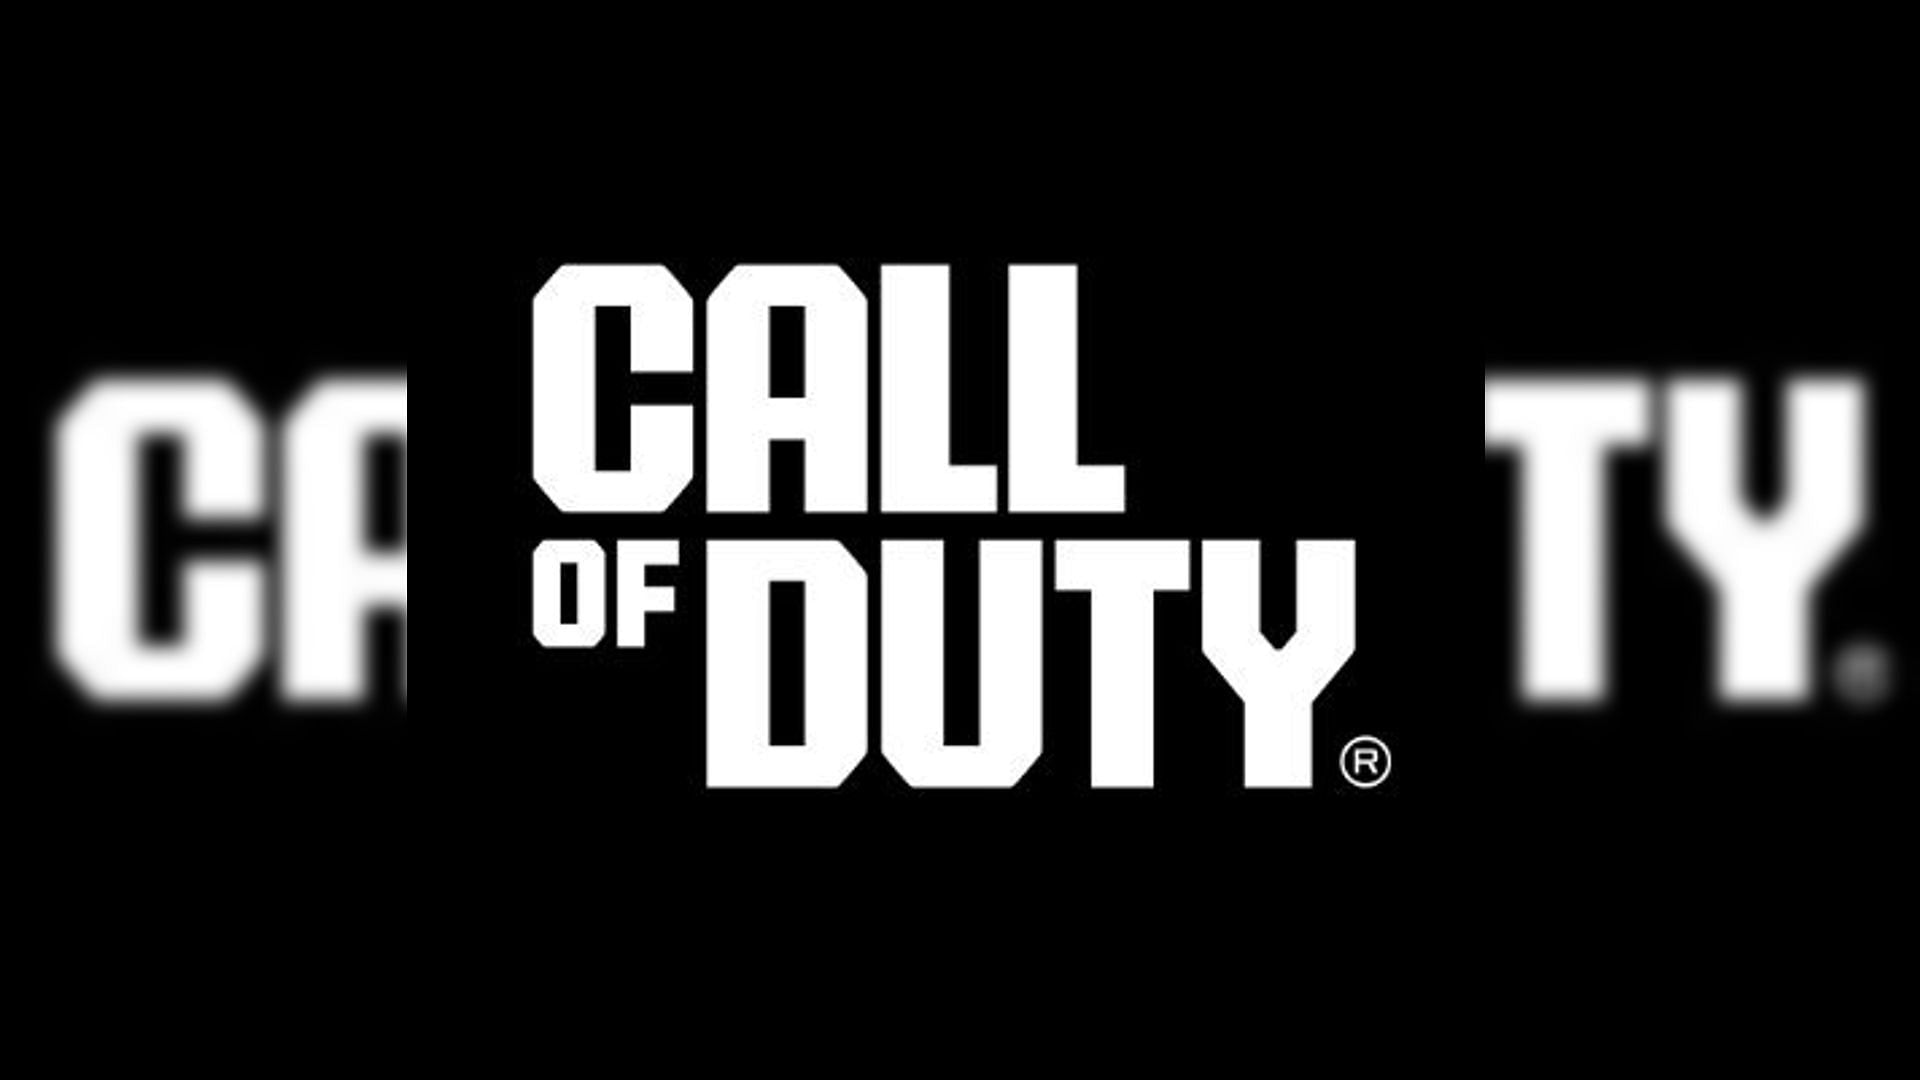 Call of Duty has officially changed its logo with the Season 4 update